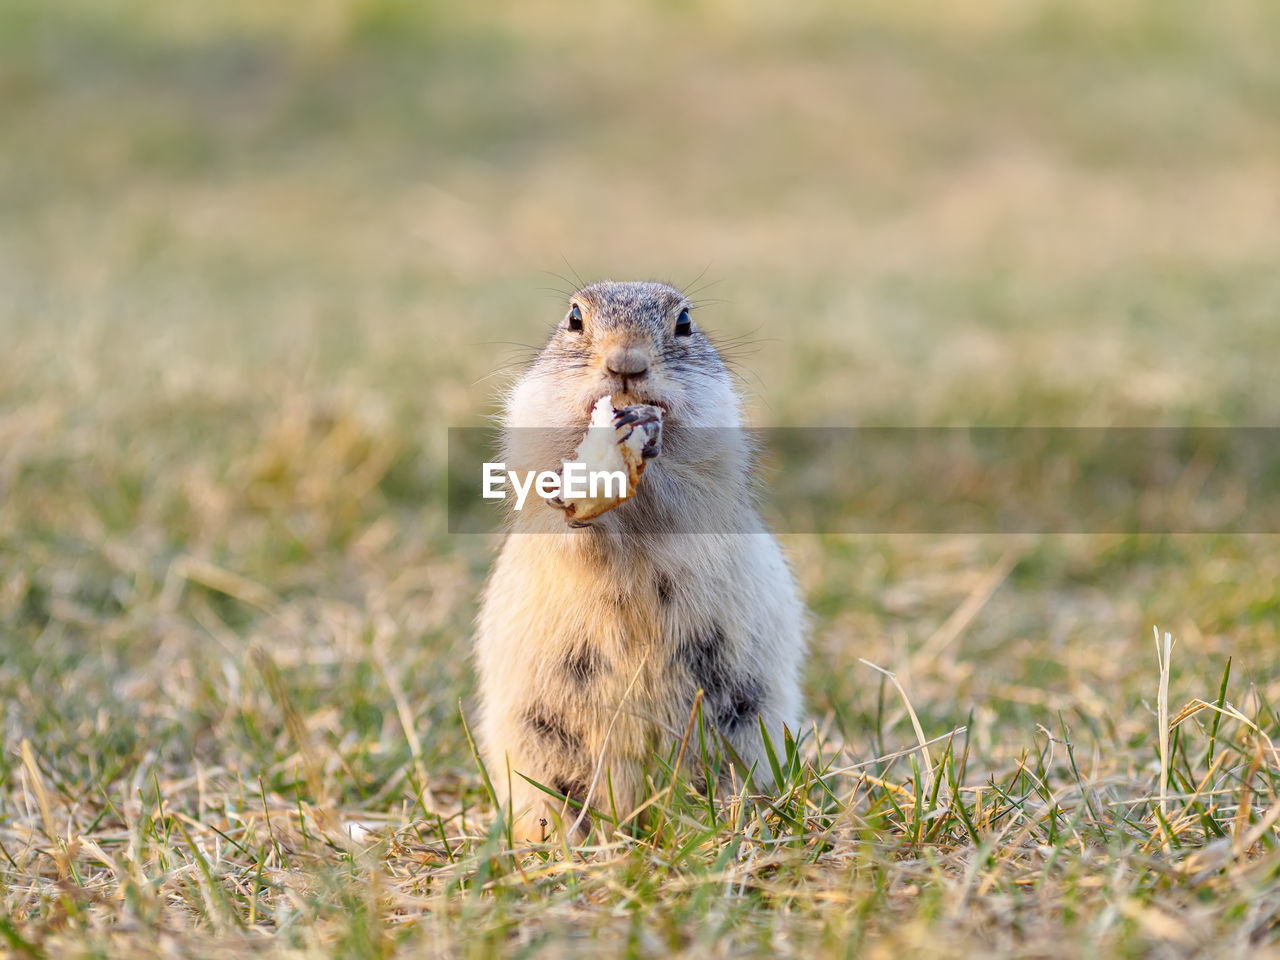 animal, animal themes, animal wildlife, mammal, one animal, wildlife, prairie dog, squirrel, grass, prairie, no people, nature, rodent, portrait, grassland, outdoors, eating, selective focus, plant, whiskers, day, front view, looking at camera